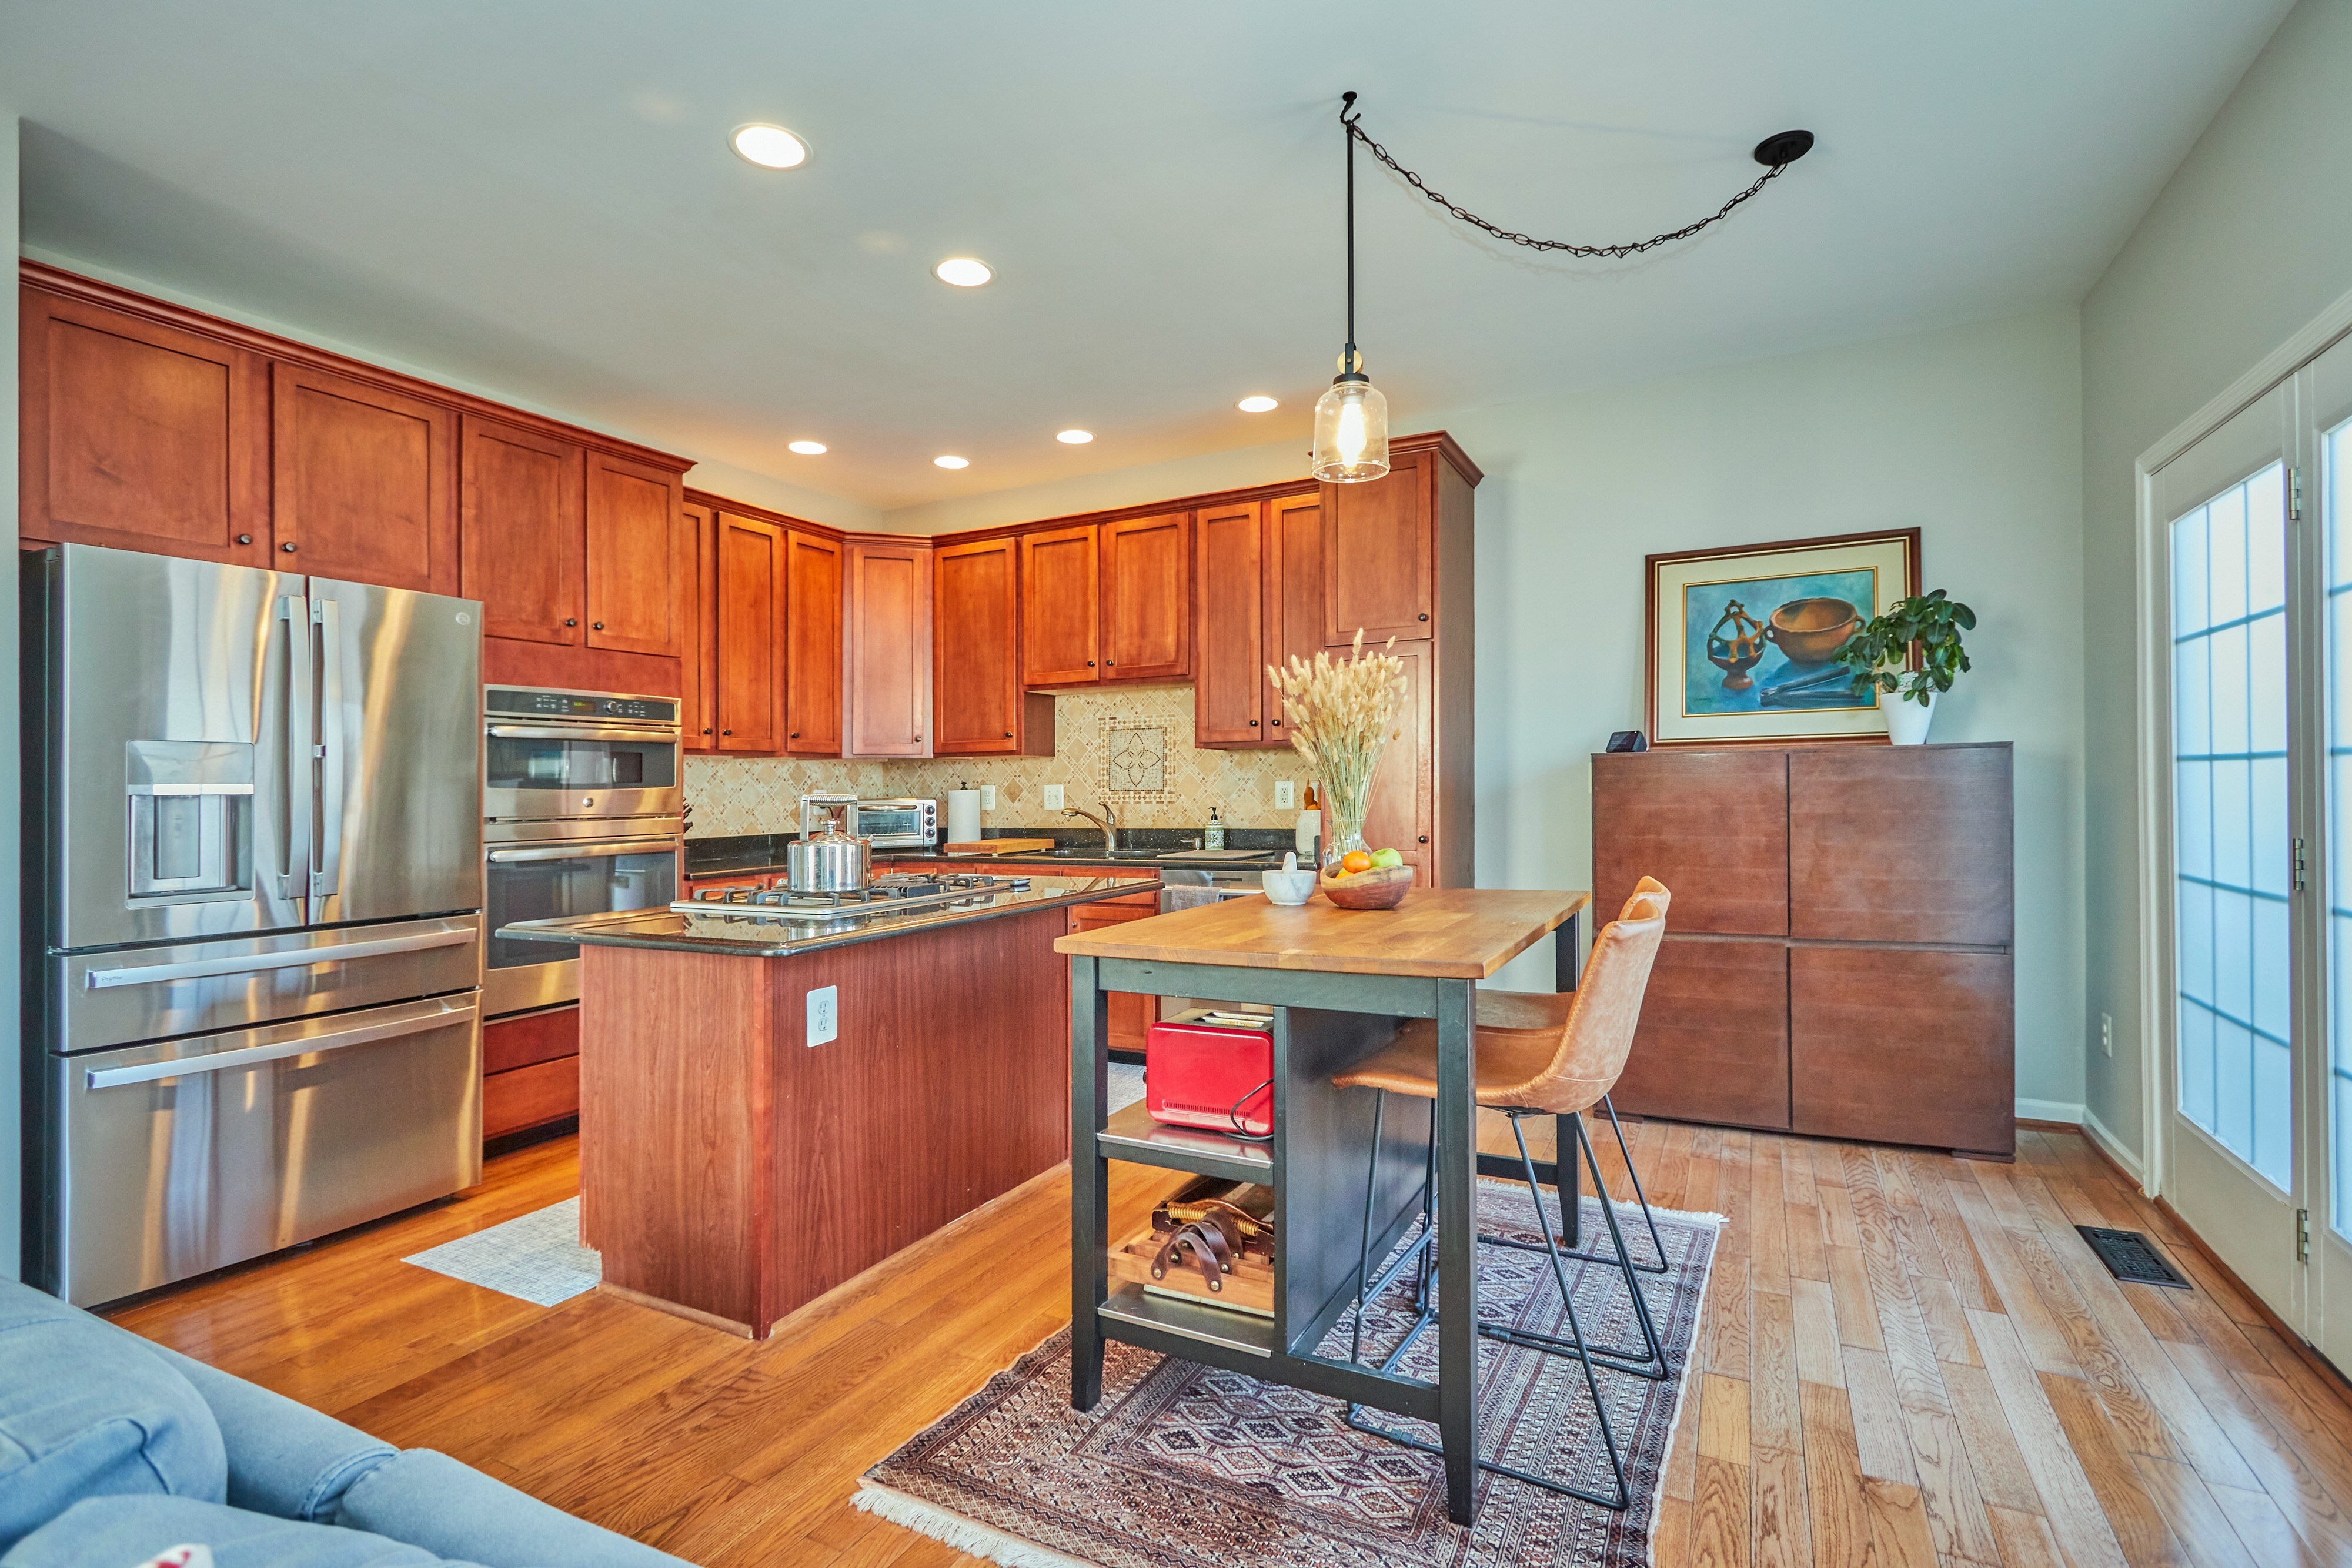 Professional interior photo of 25499 Beresford Drive, Chantilly, Virginia - showing the kitchen and breakfast area with stainless appliances and hardwood floors